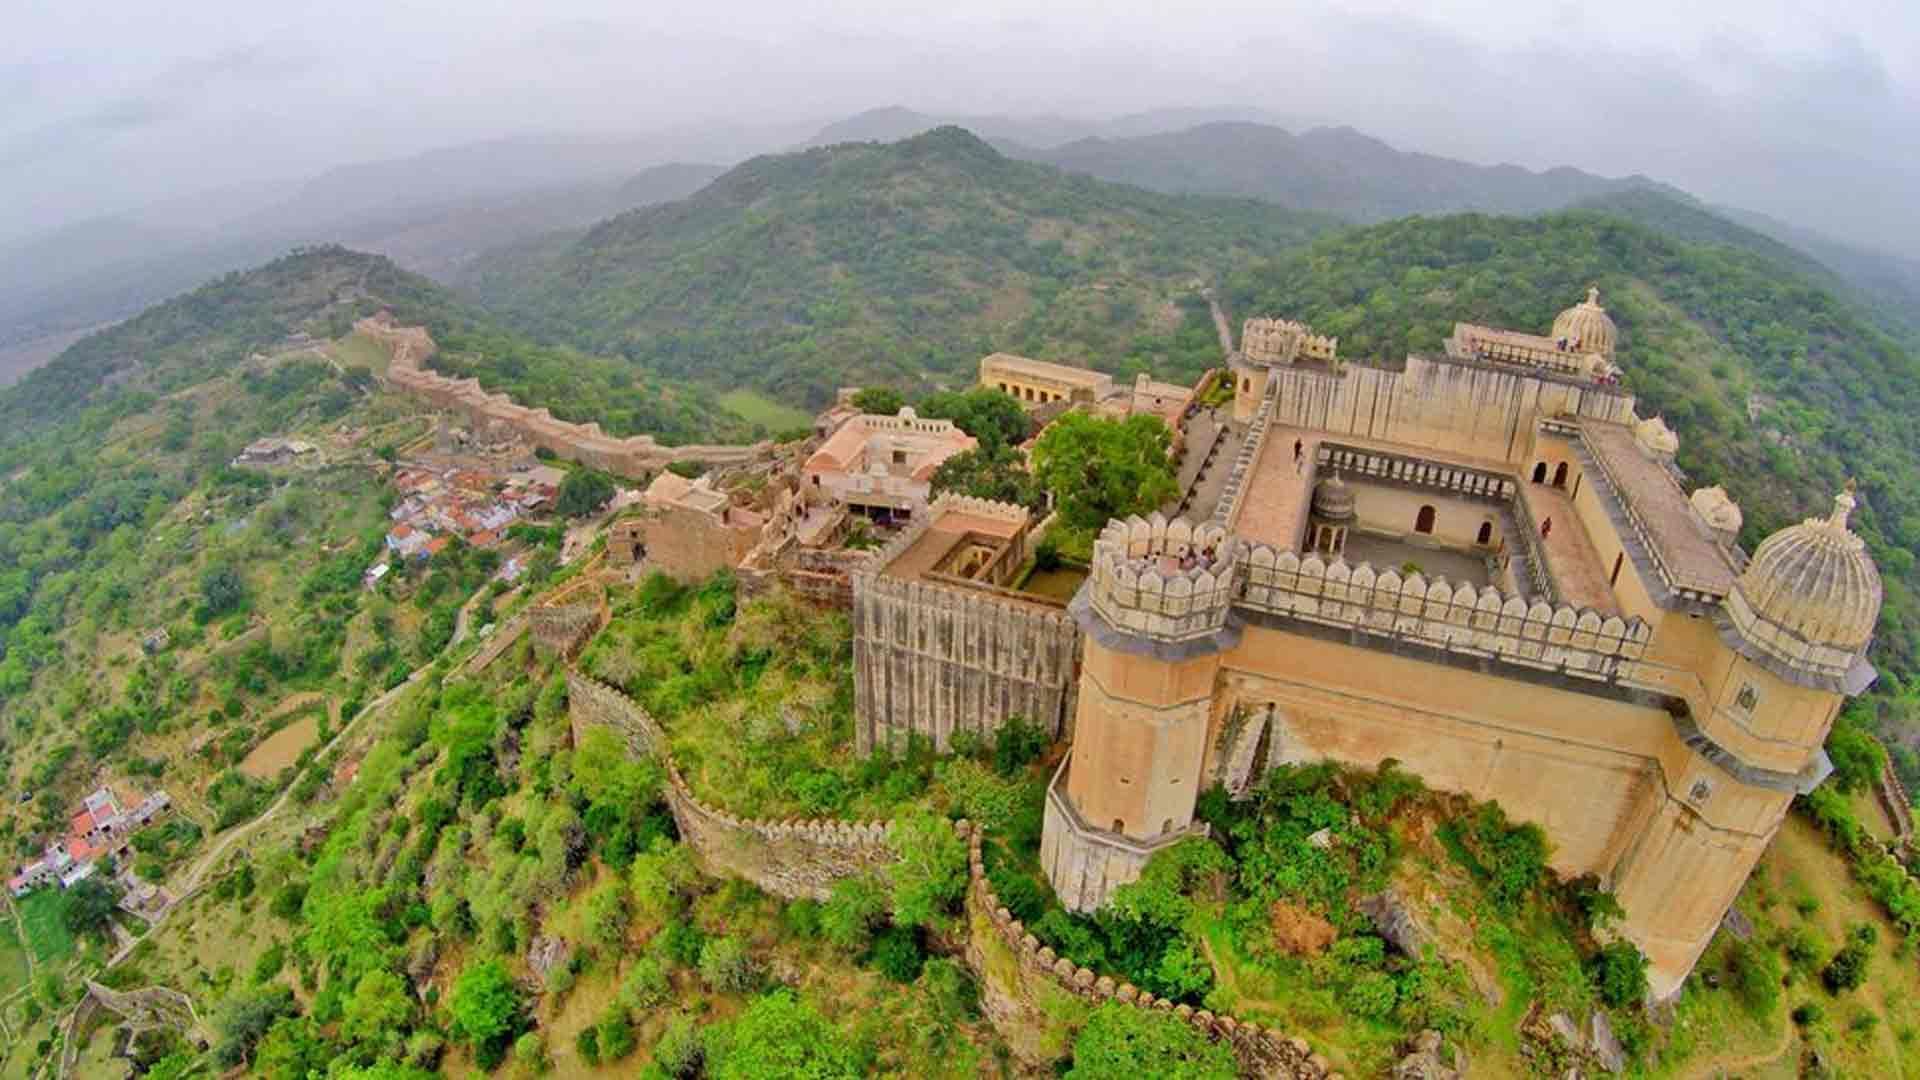 Kumbhalgarh Fort In Rajasthan Has Got The Second Largest Wall